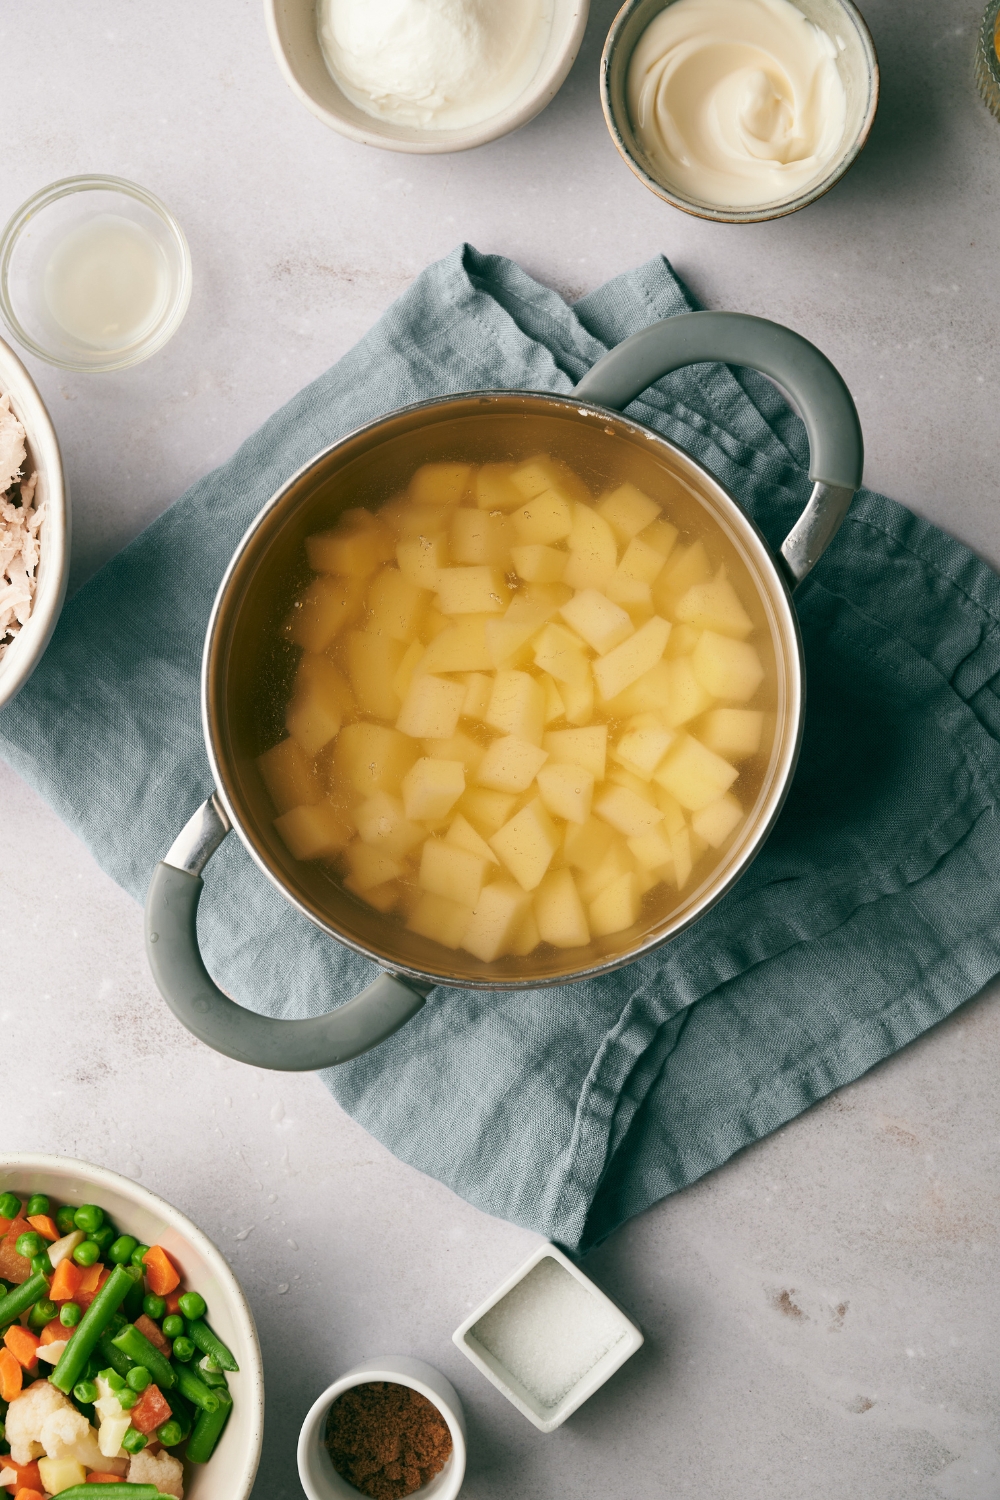 A stock pot with diced potatoes in water sits on a blue dish towel. Small bowls of ingredients are nearby.